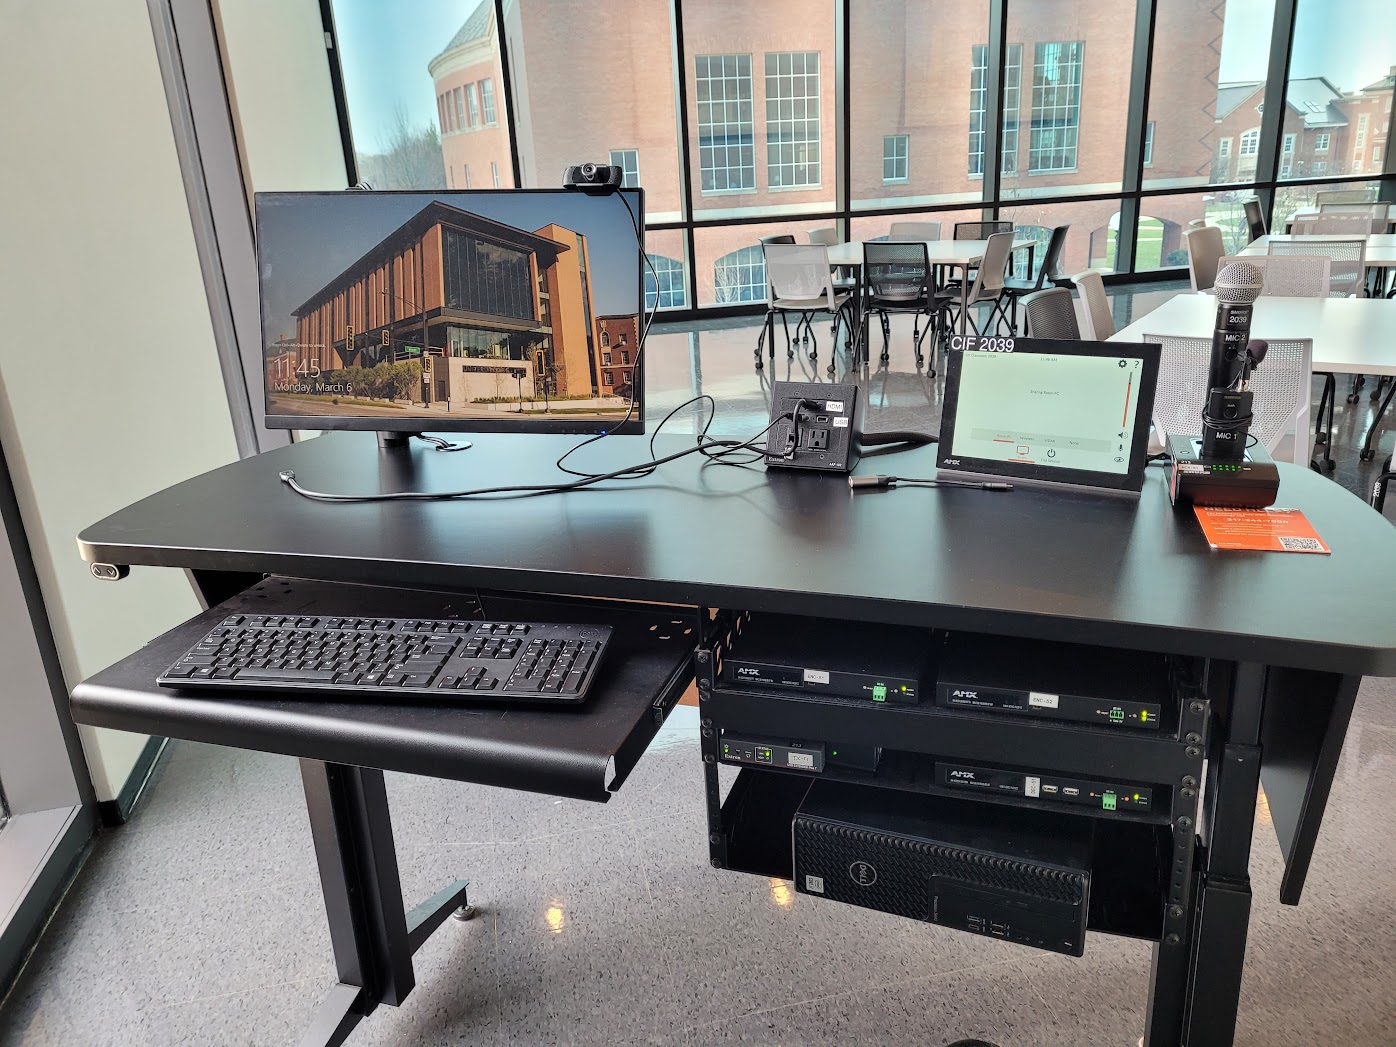 The instructor lecture table with the control panel, keyboard, mouse, monitor, and microphone on top, the PC, and sound equipment mounted underneath.